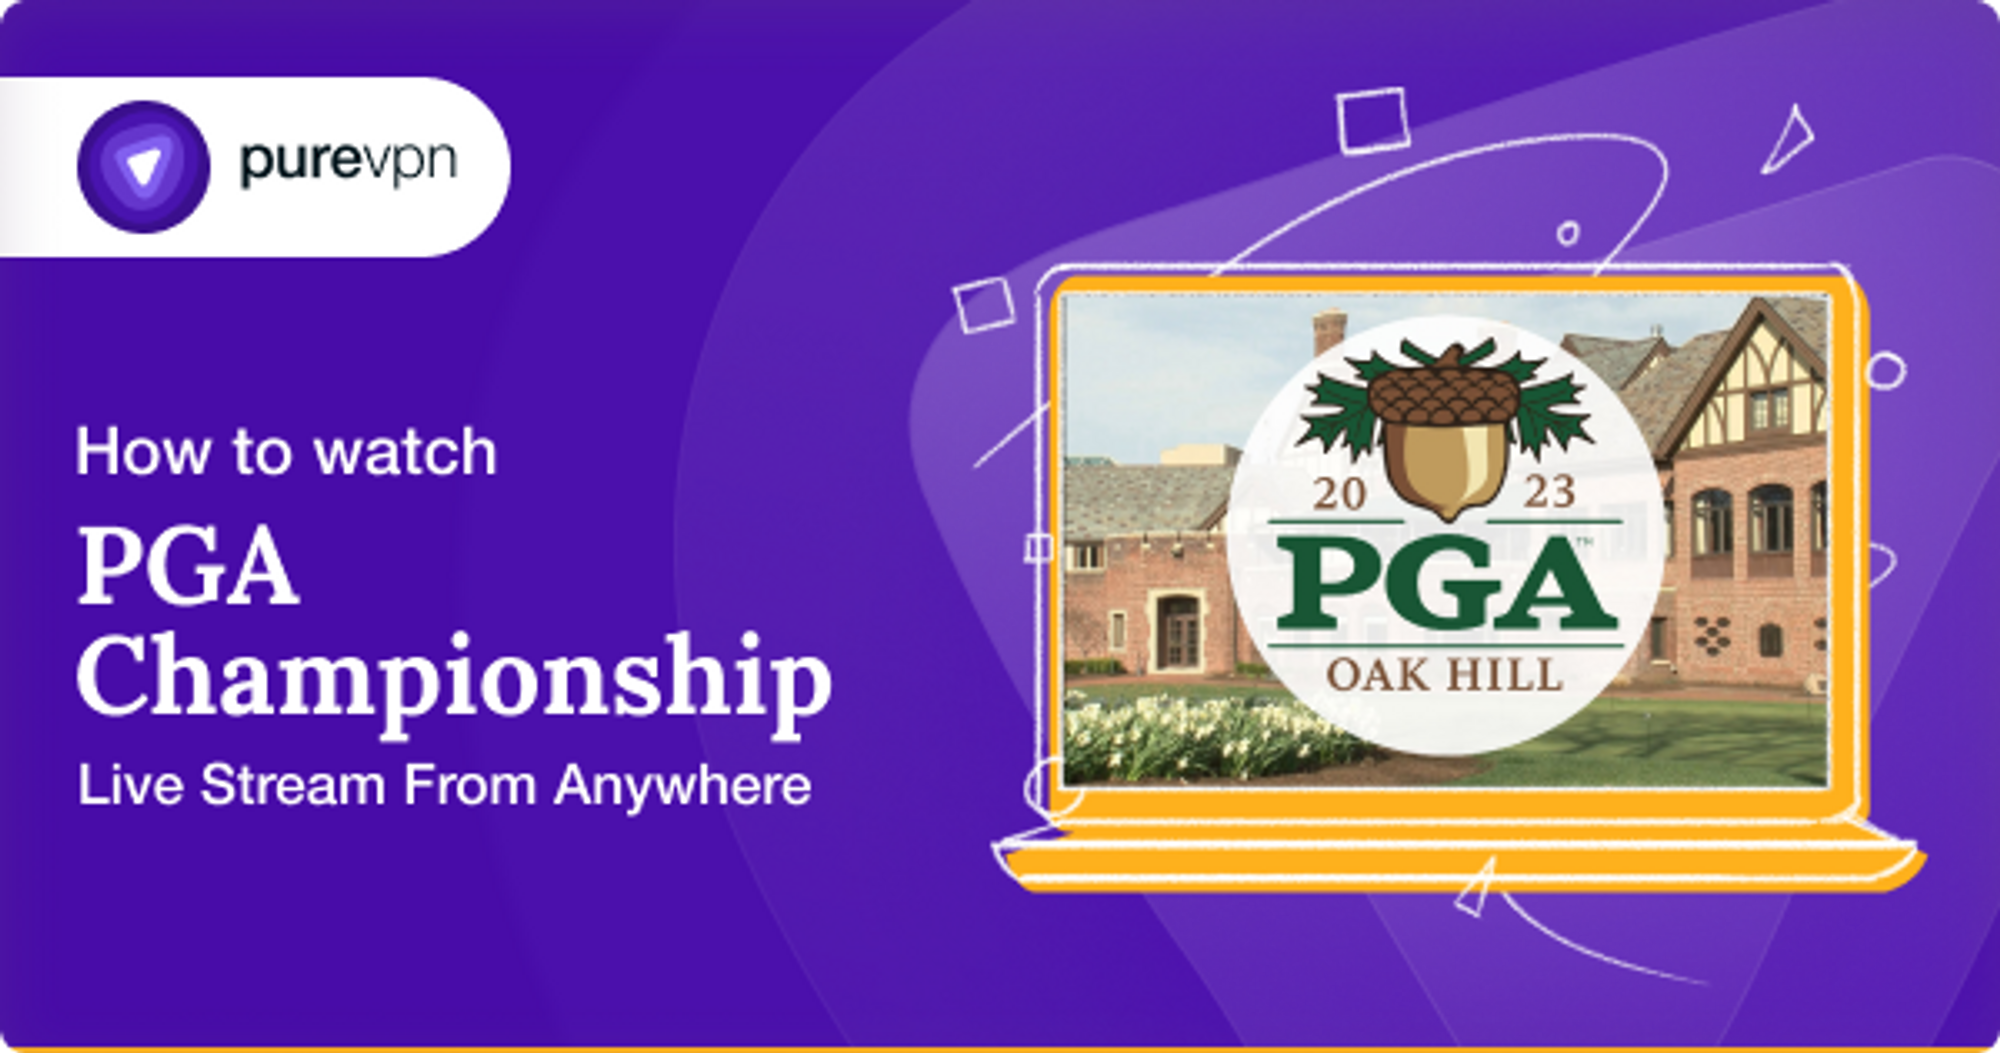 How to Watch PGA Championship Live Stream from Anywhere